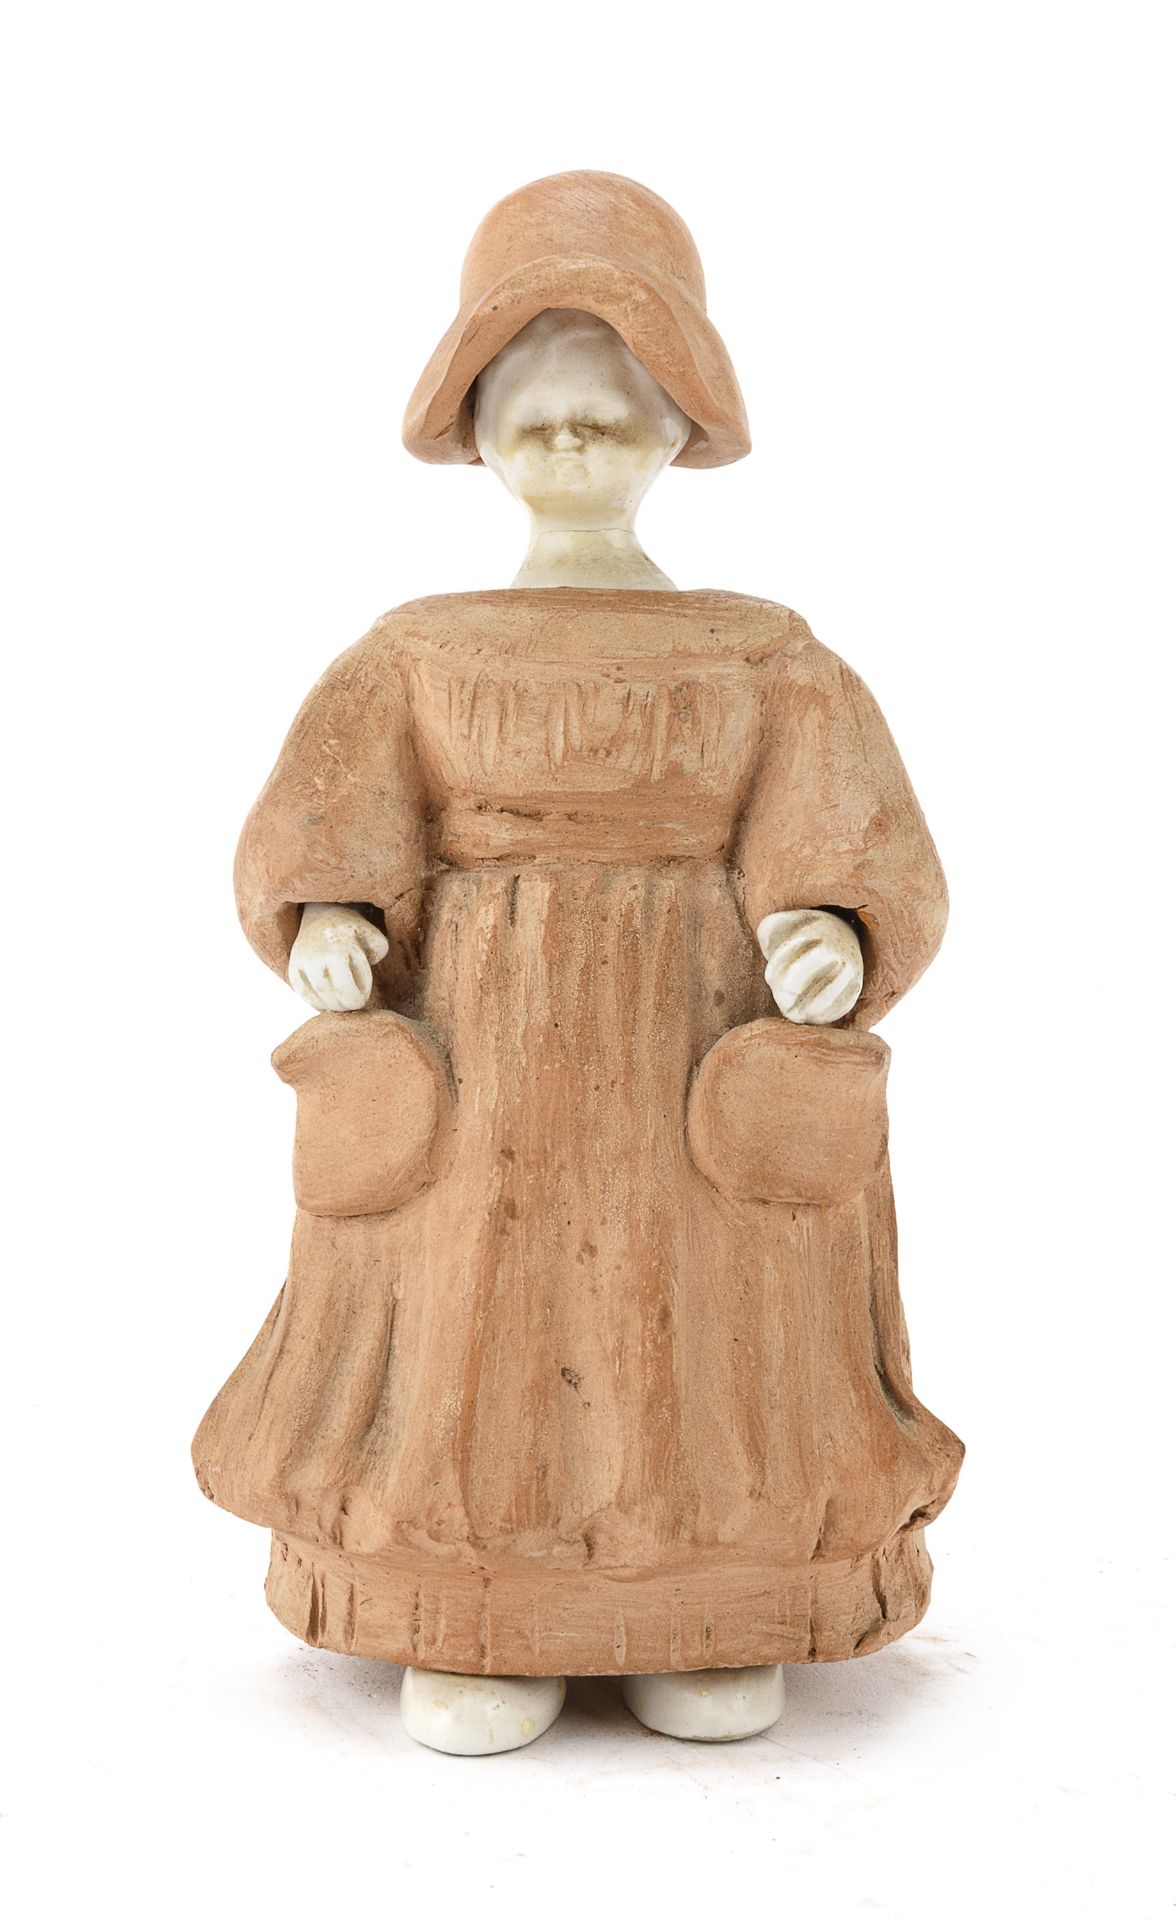 TERRACOTTA SCULPTURE FRANCE EARLY 20TH CENTURY